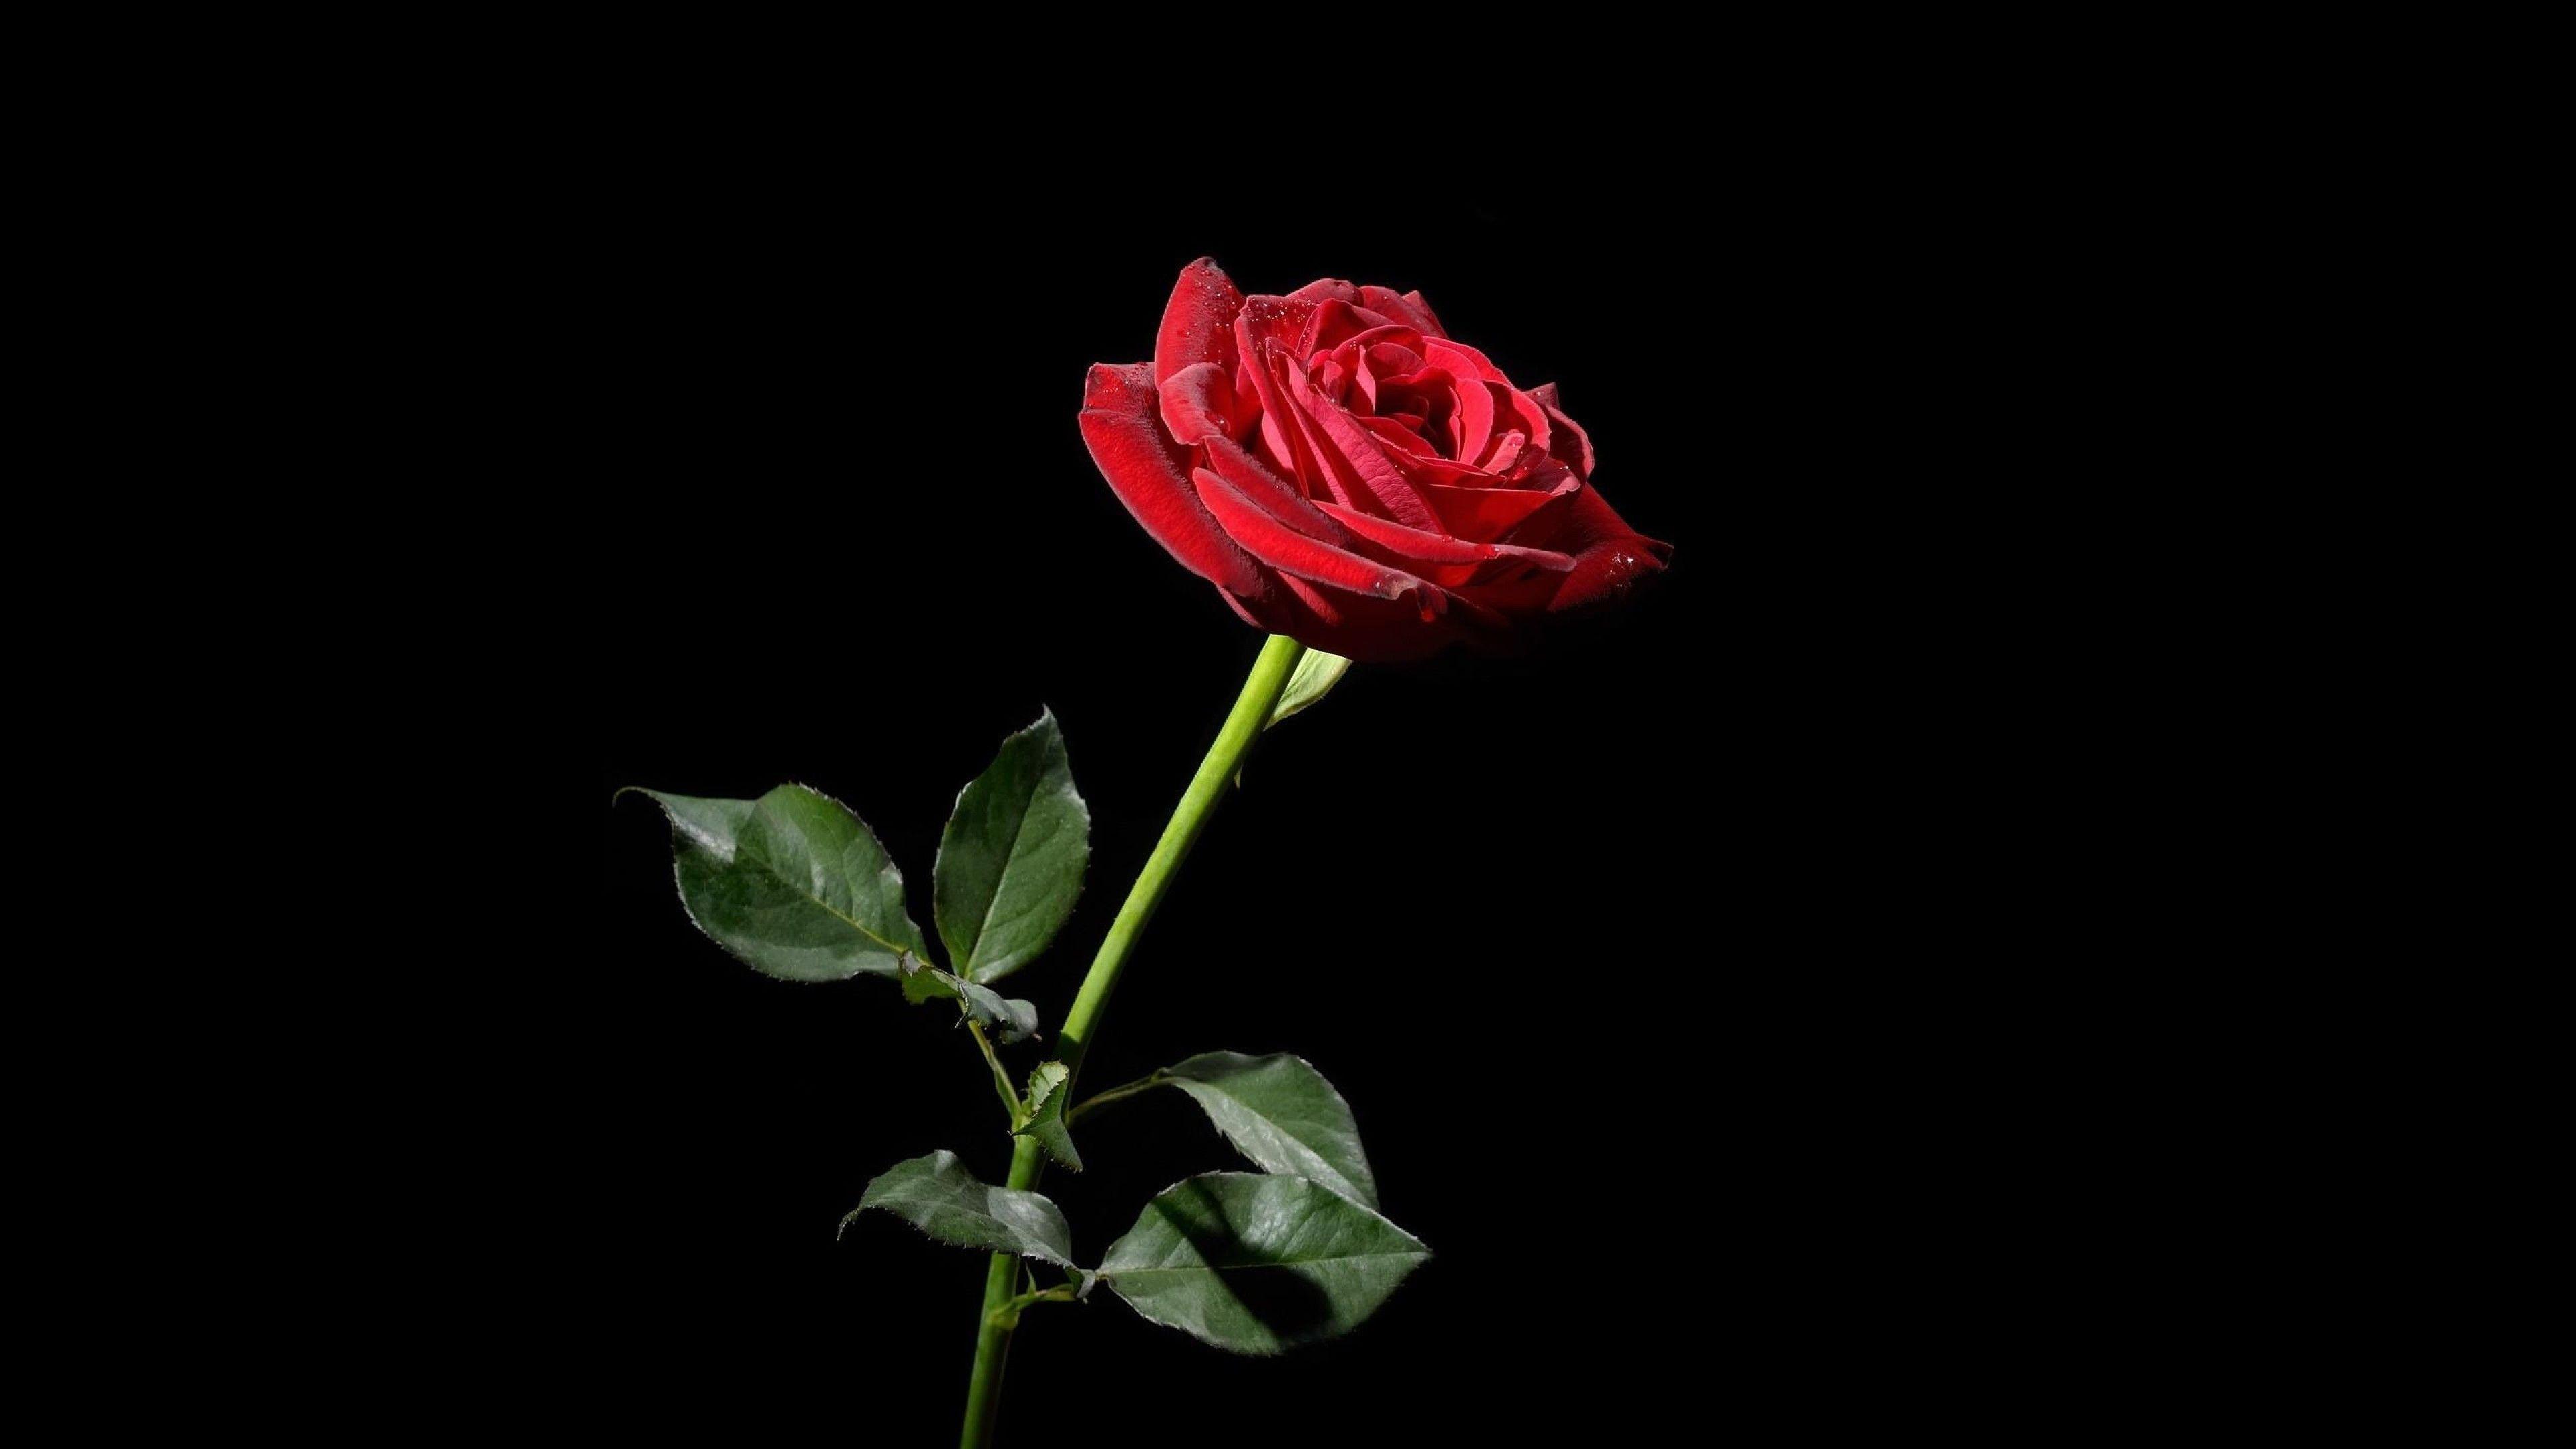 Black And Red Rose Wallpaper 63 Image With